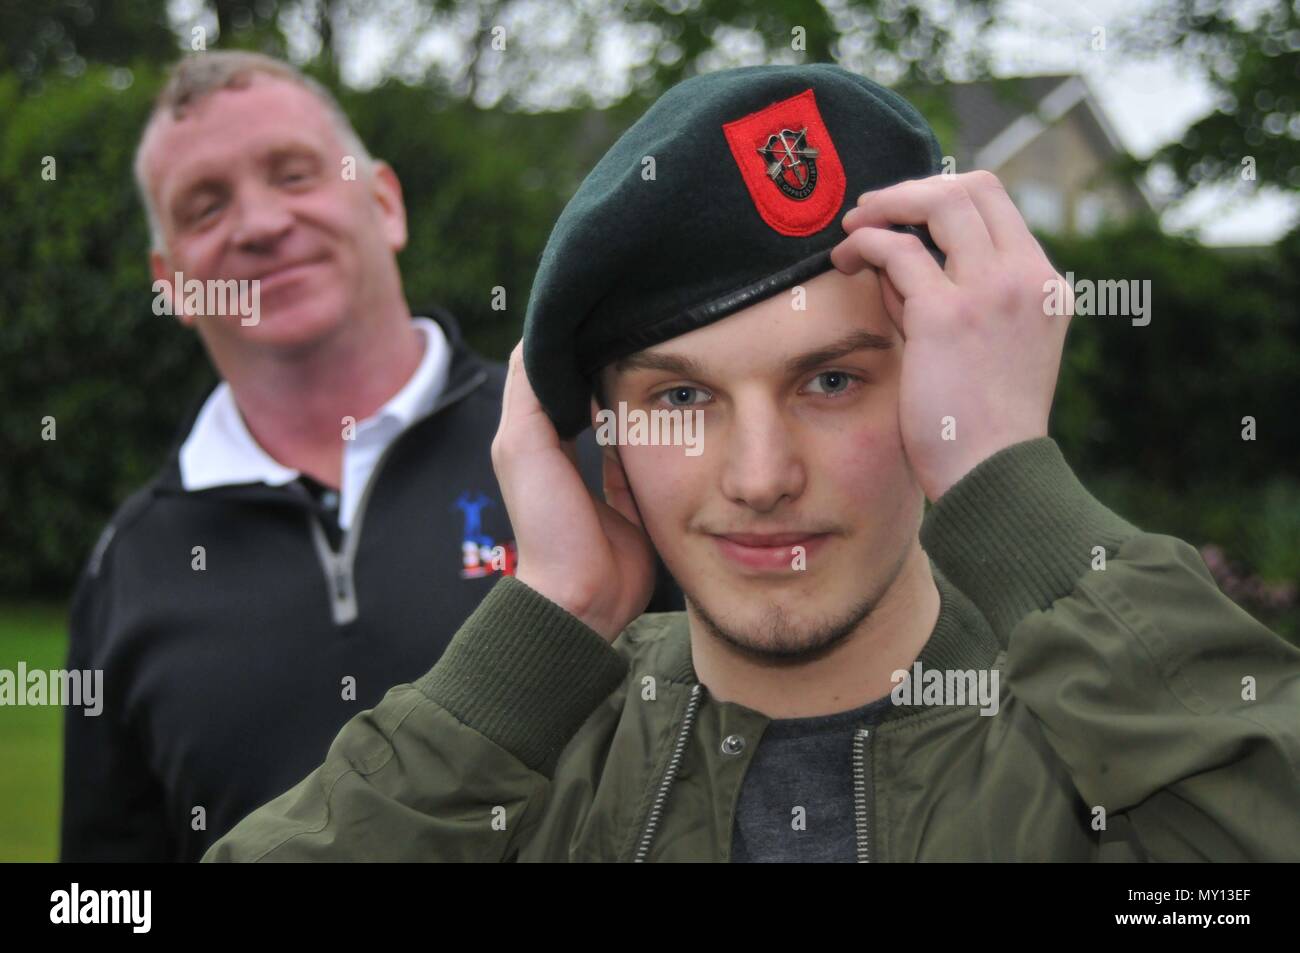 Leeds, West Yorkshire. 5th June, 2018. HATS OFF TO CHRIS: Army hopeful  Chris Collington, from Leeds, shows off a Green Beret, sent to him from US  Army Veteran Capt Mike Rose of